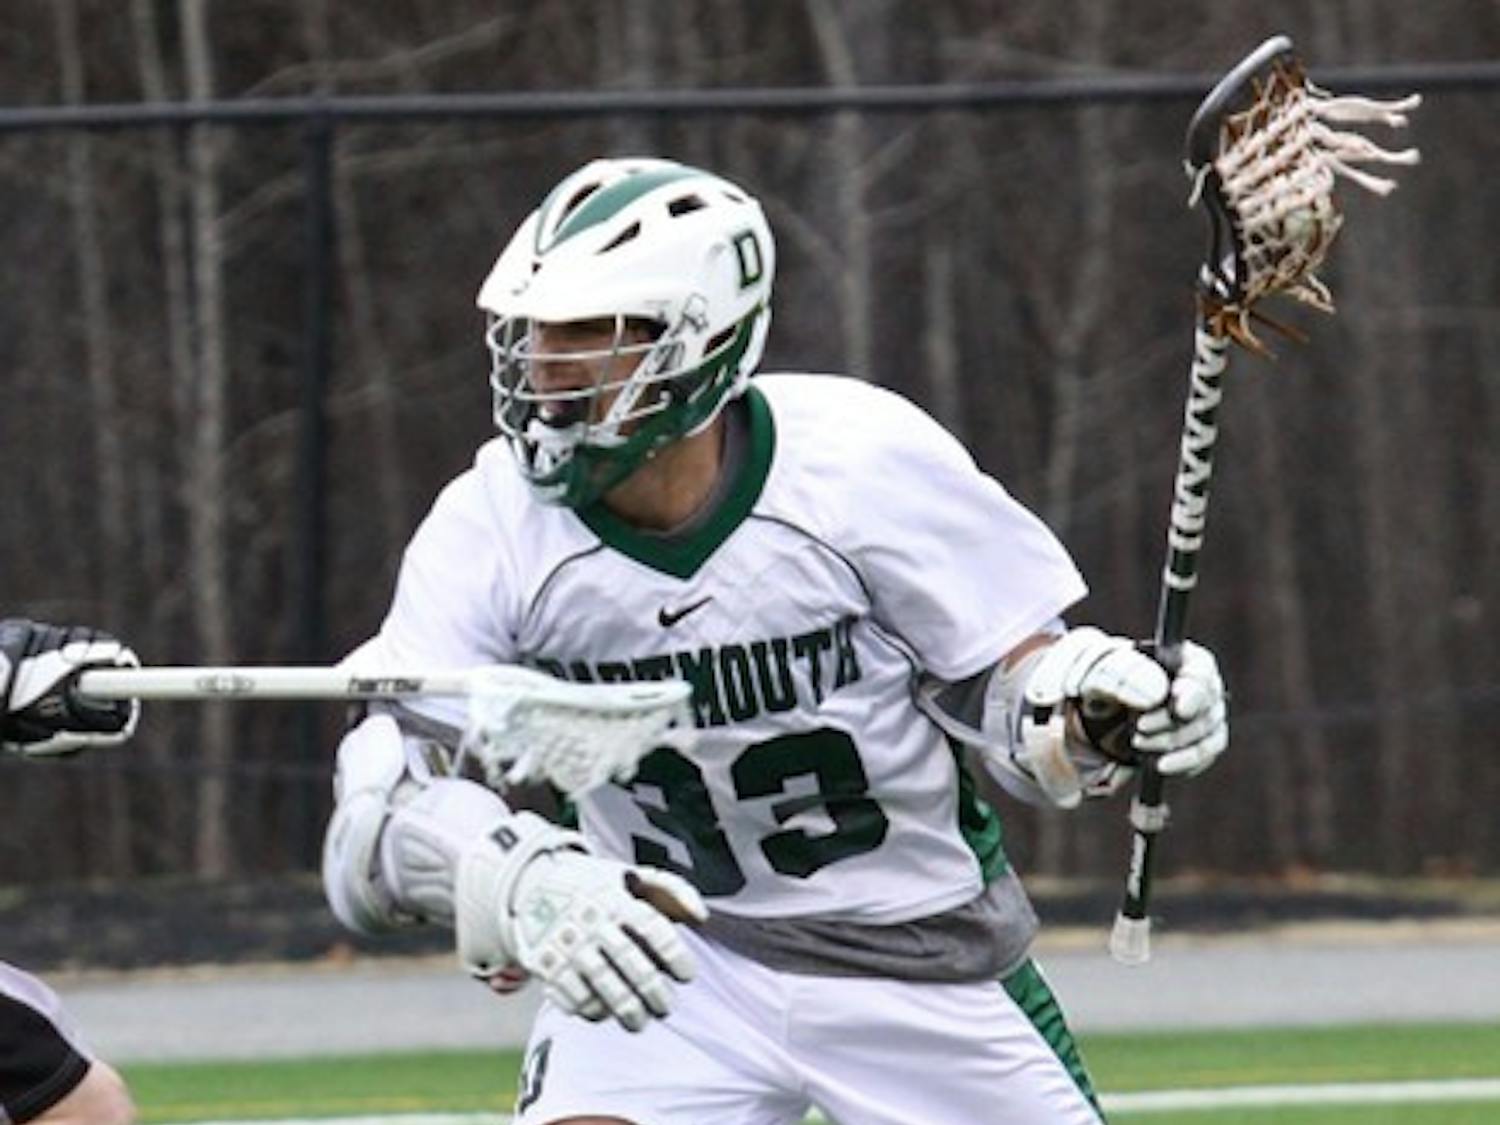 Ari Sussman '10 scored the game-tying goal with 54 seconds left to send Dartmouth's game against Yale into overtime.